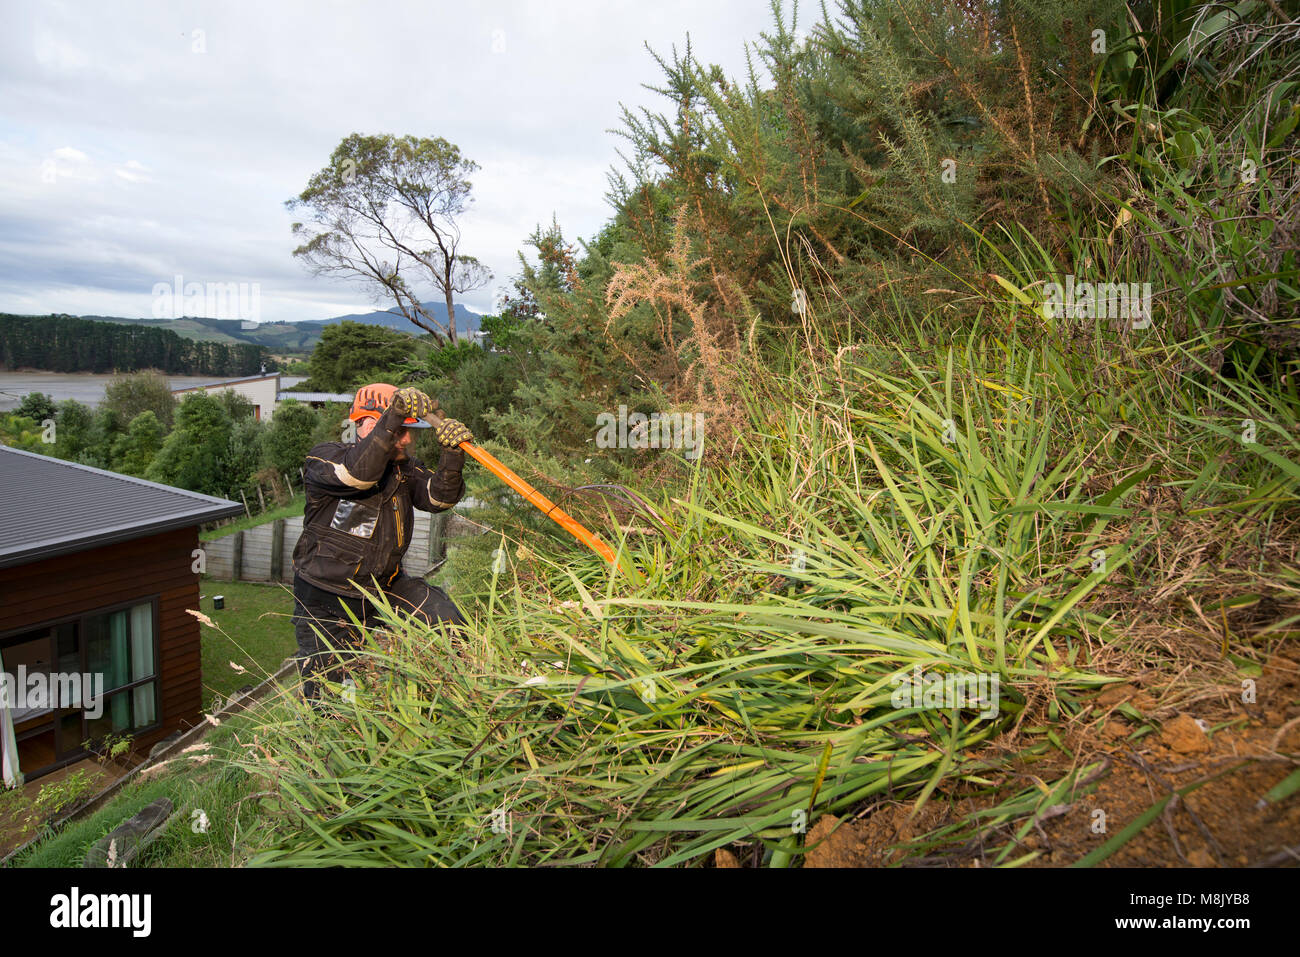 Man removing weeds from hill Stock Photo